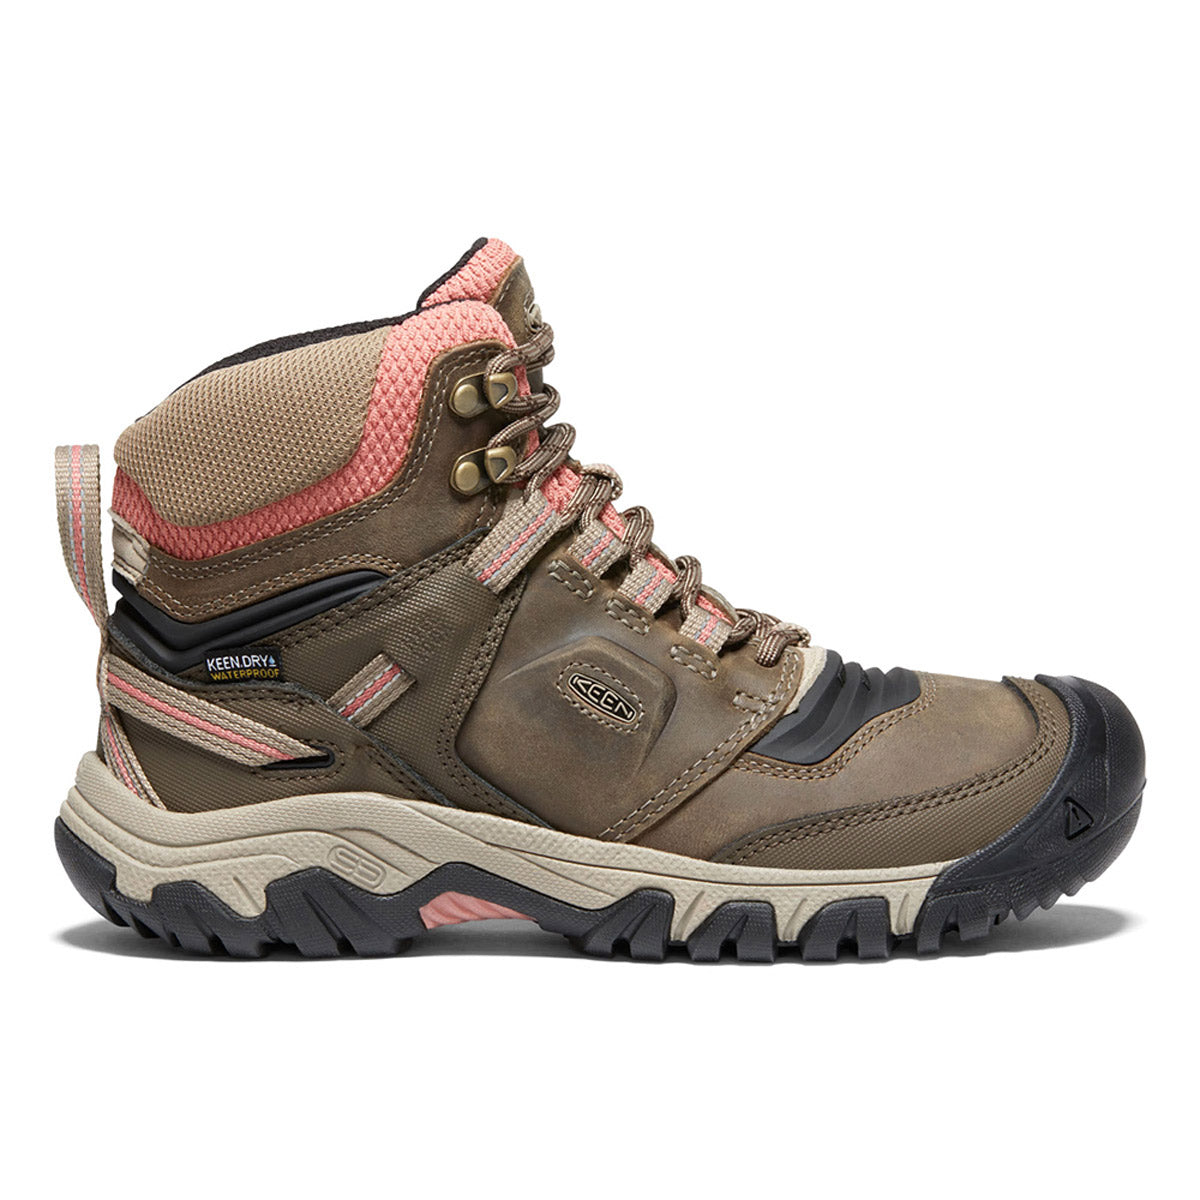 A single brown and pink Keen Ridge Flex Mid Waterproof Timberwolf hiking boot with metal eyelets and rugged sole, featuring branding logos.